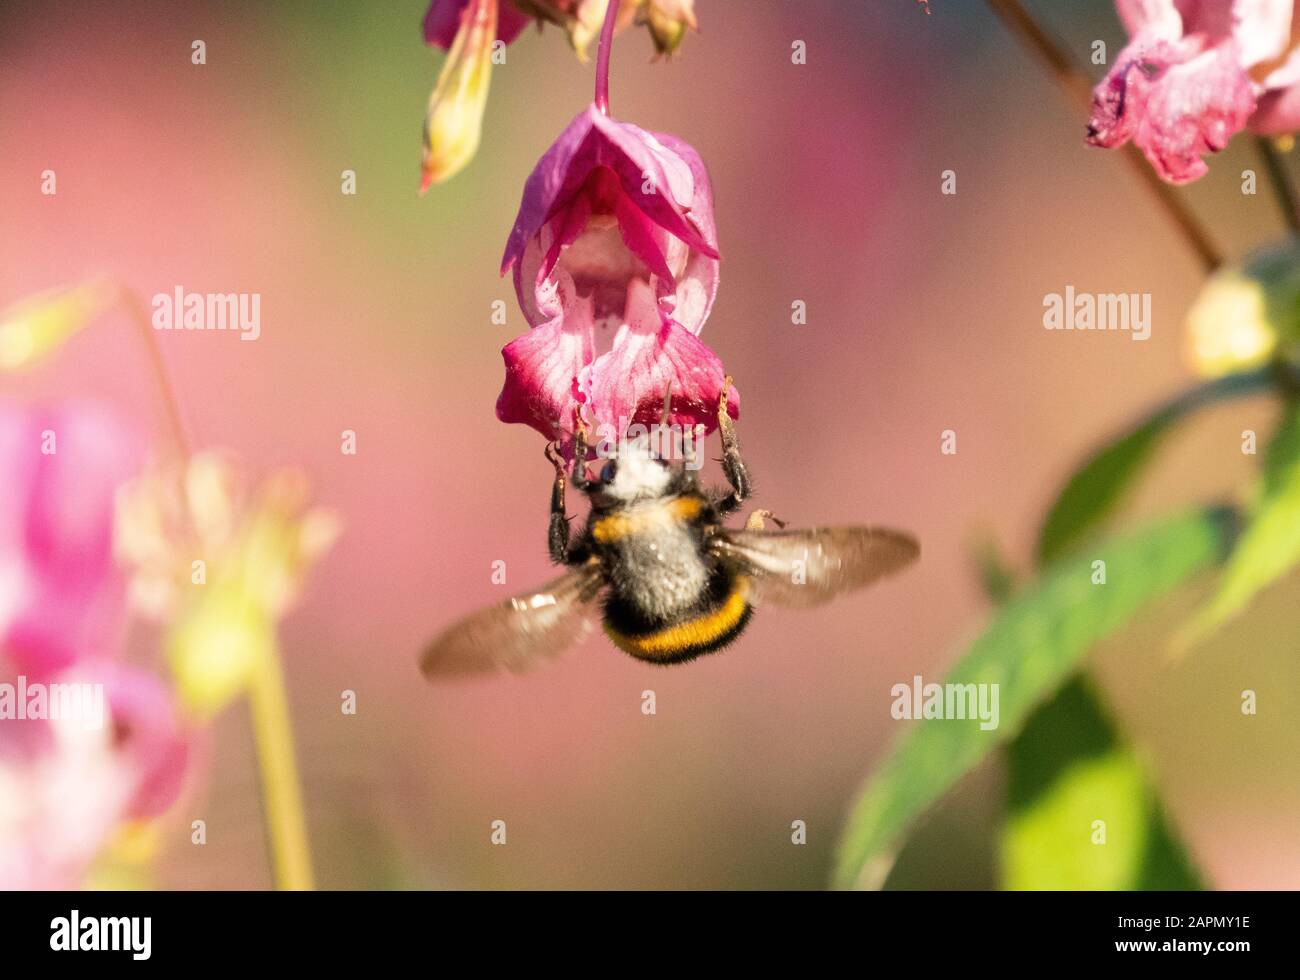 A pollen covered bee hanging below a vibrant pink Himalayan balsam flower Stock Photo